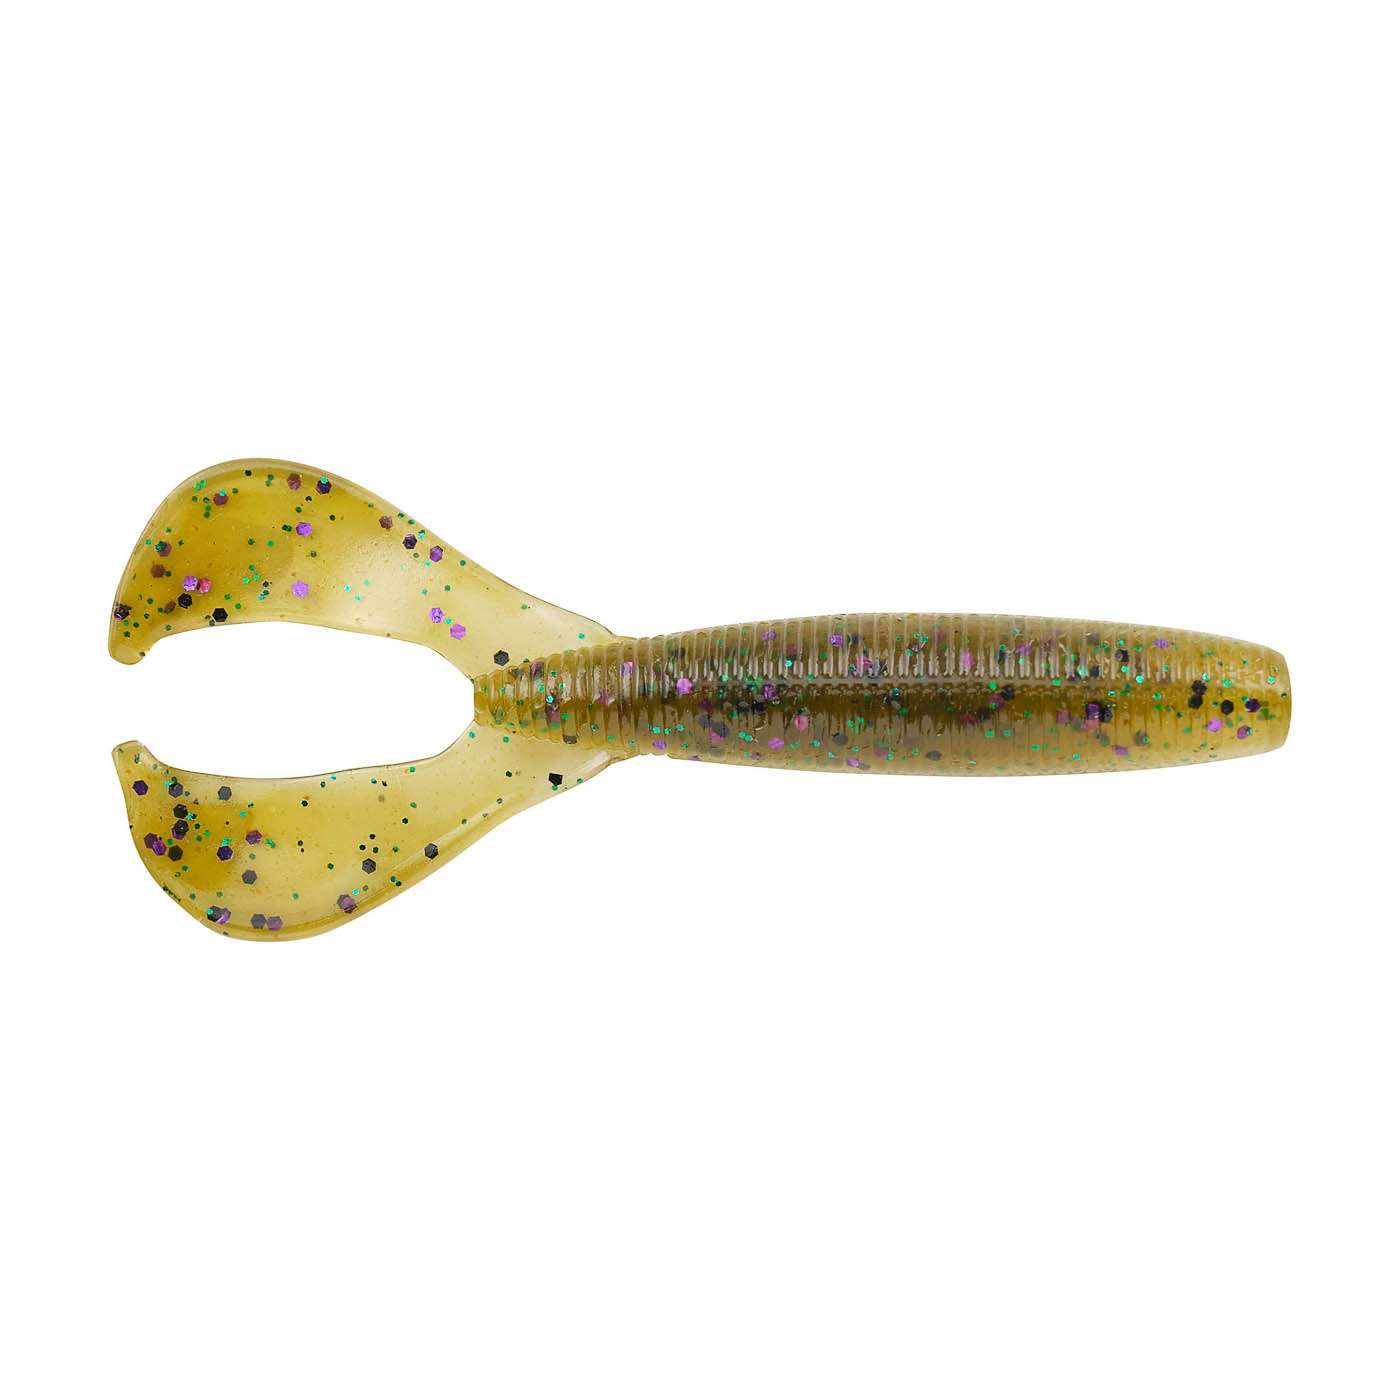 <p><strong>PowerBait The Boss Grub</strong></p><p>The Boss Grub combines the profile of either a grub or a worm, with PowerBait Pit Boss-inspired action legs to create maximum water displacement. The chunky profile is ideal as a bladed jig trailer, on a jighead, swing head, or Texas rig. Sizes: 4.75-, 5.75- and 6.75 inches and 12 colors. Available September 2021. $5.49. <a href=